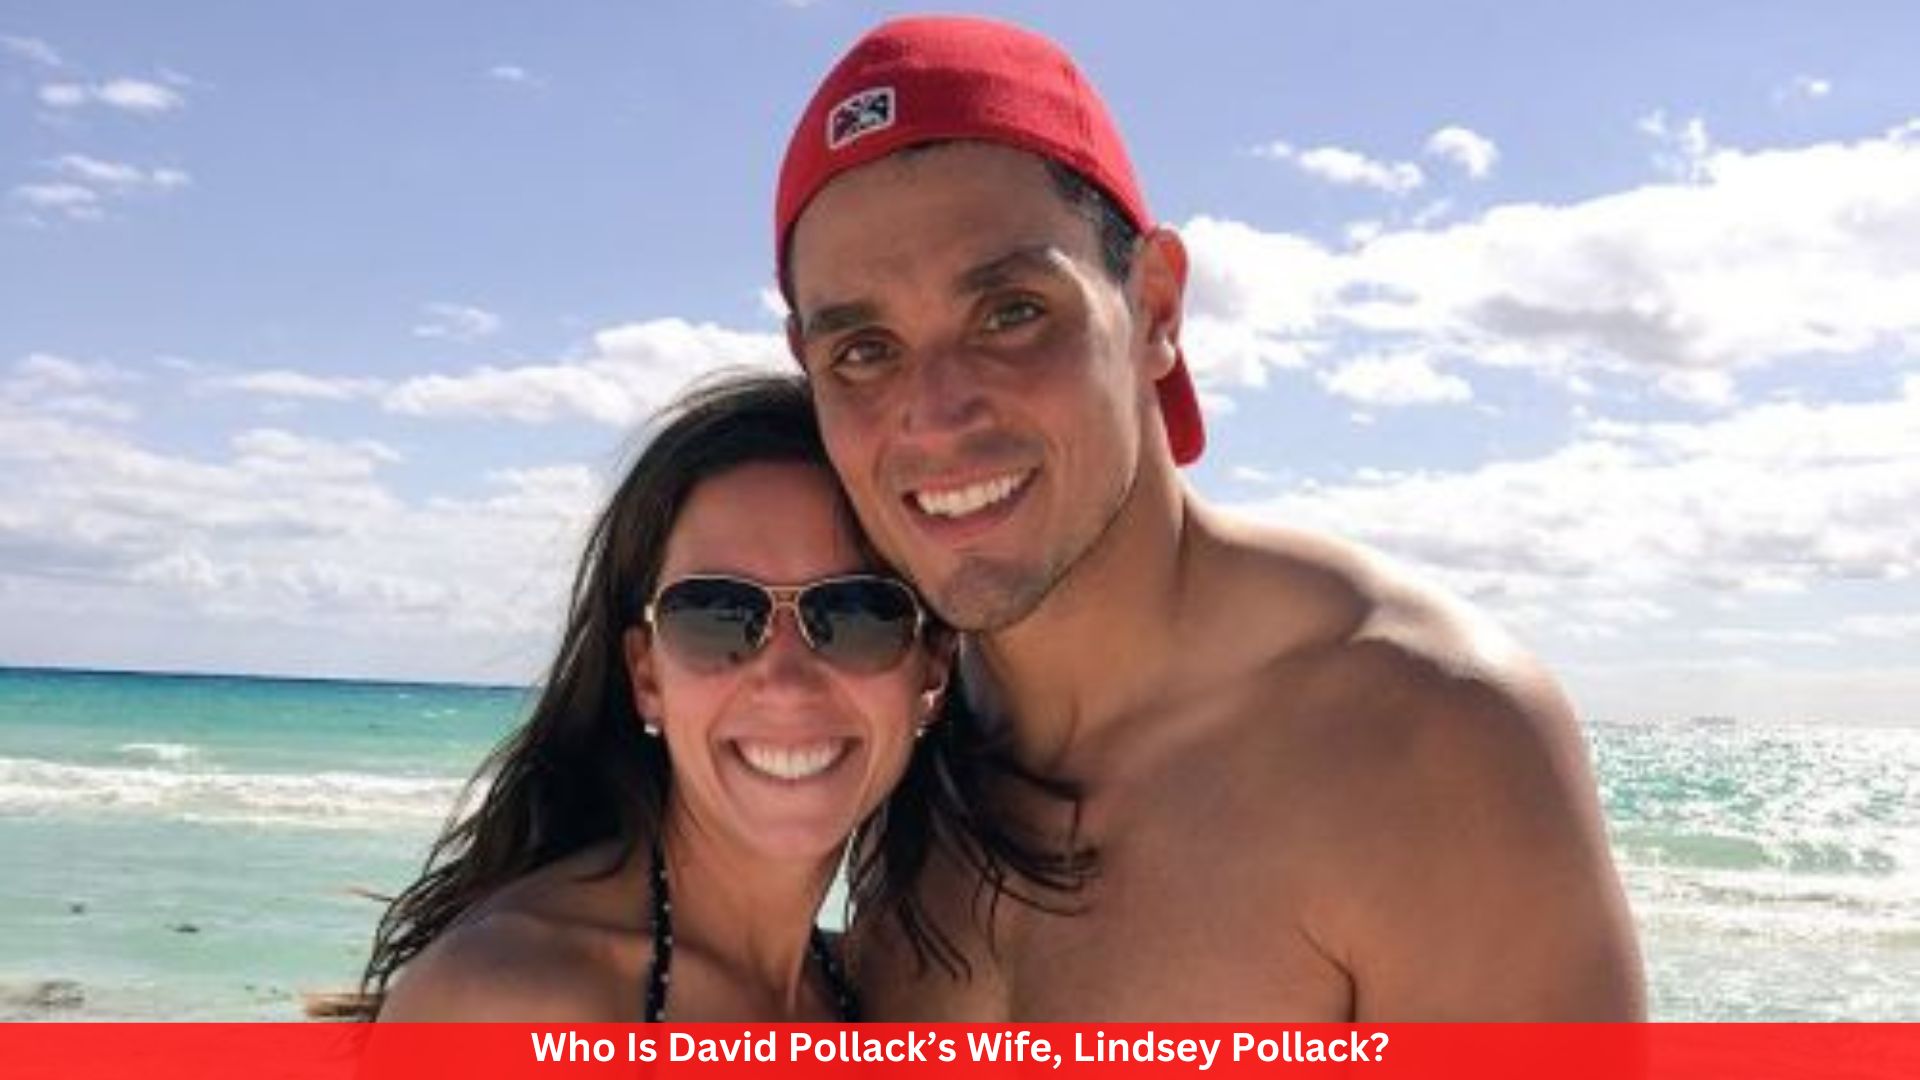 Who Is David Pollack’s Wife, Lindsey Pollack?